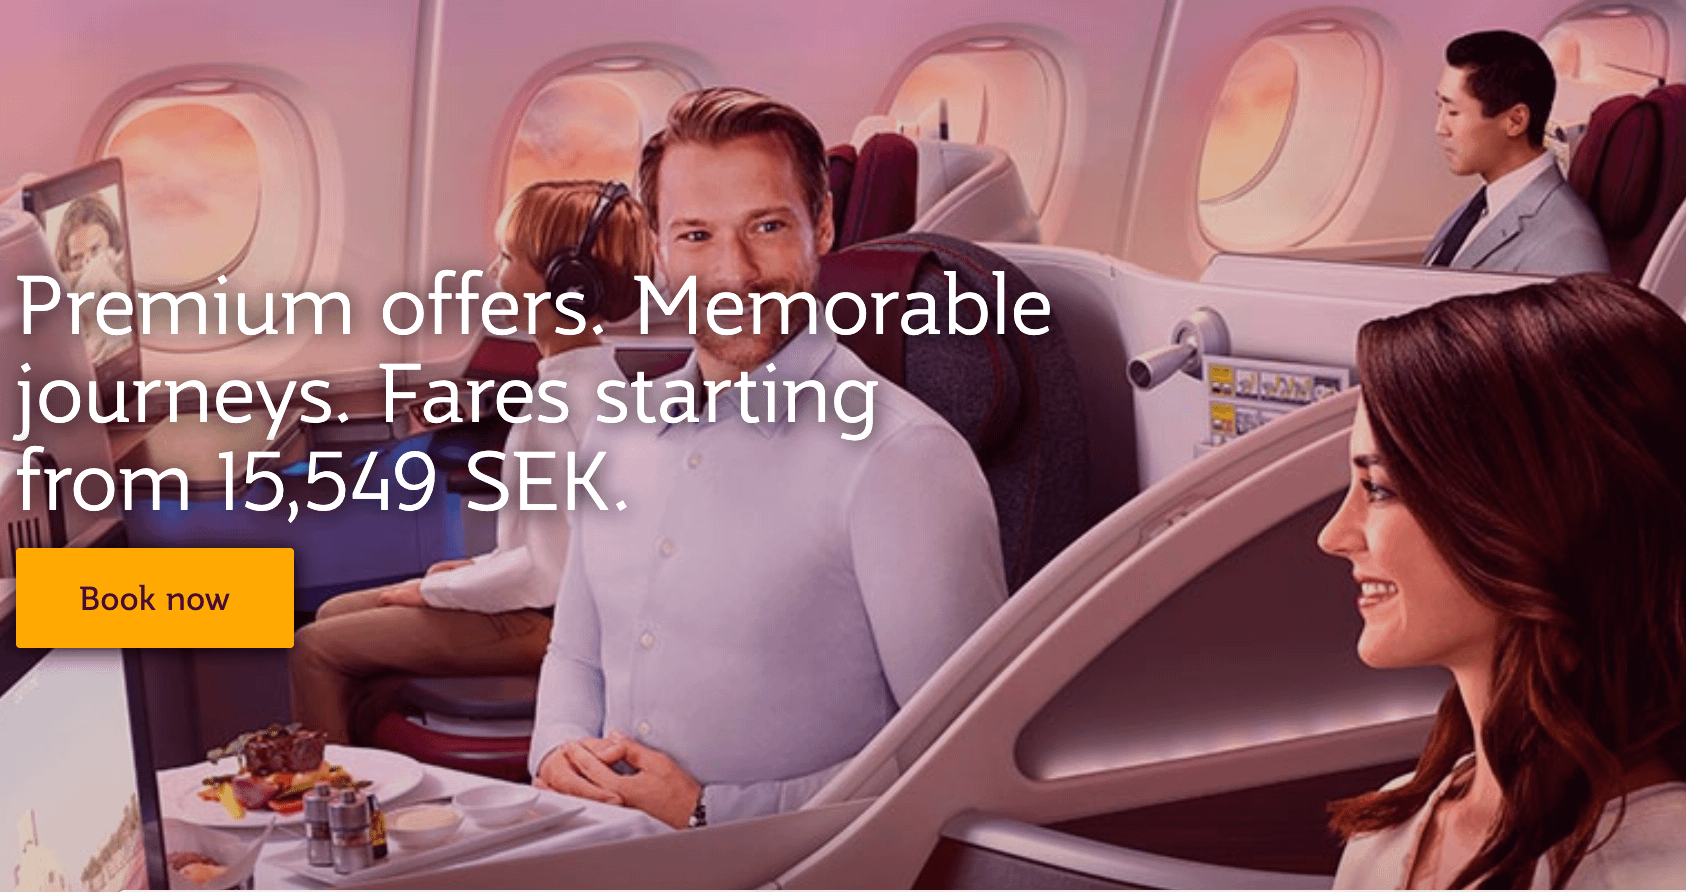 Qatar Airways Business Class Sale 2020. Premium offers from Arlanda to the world